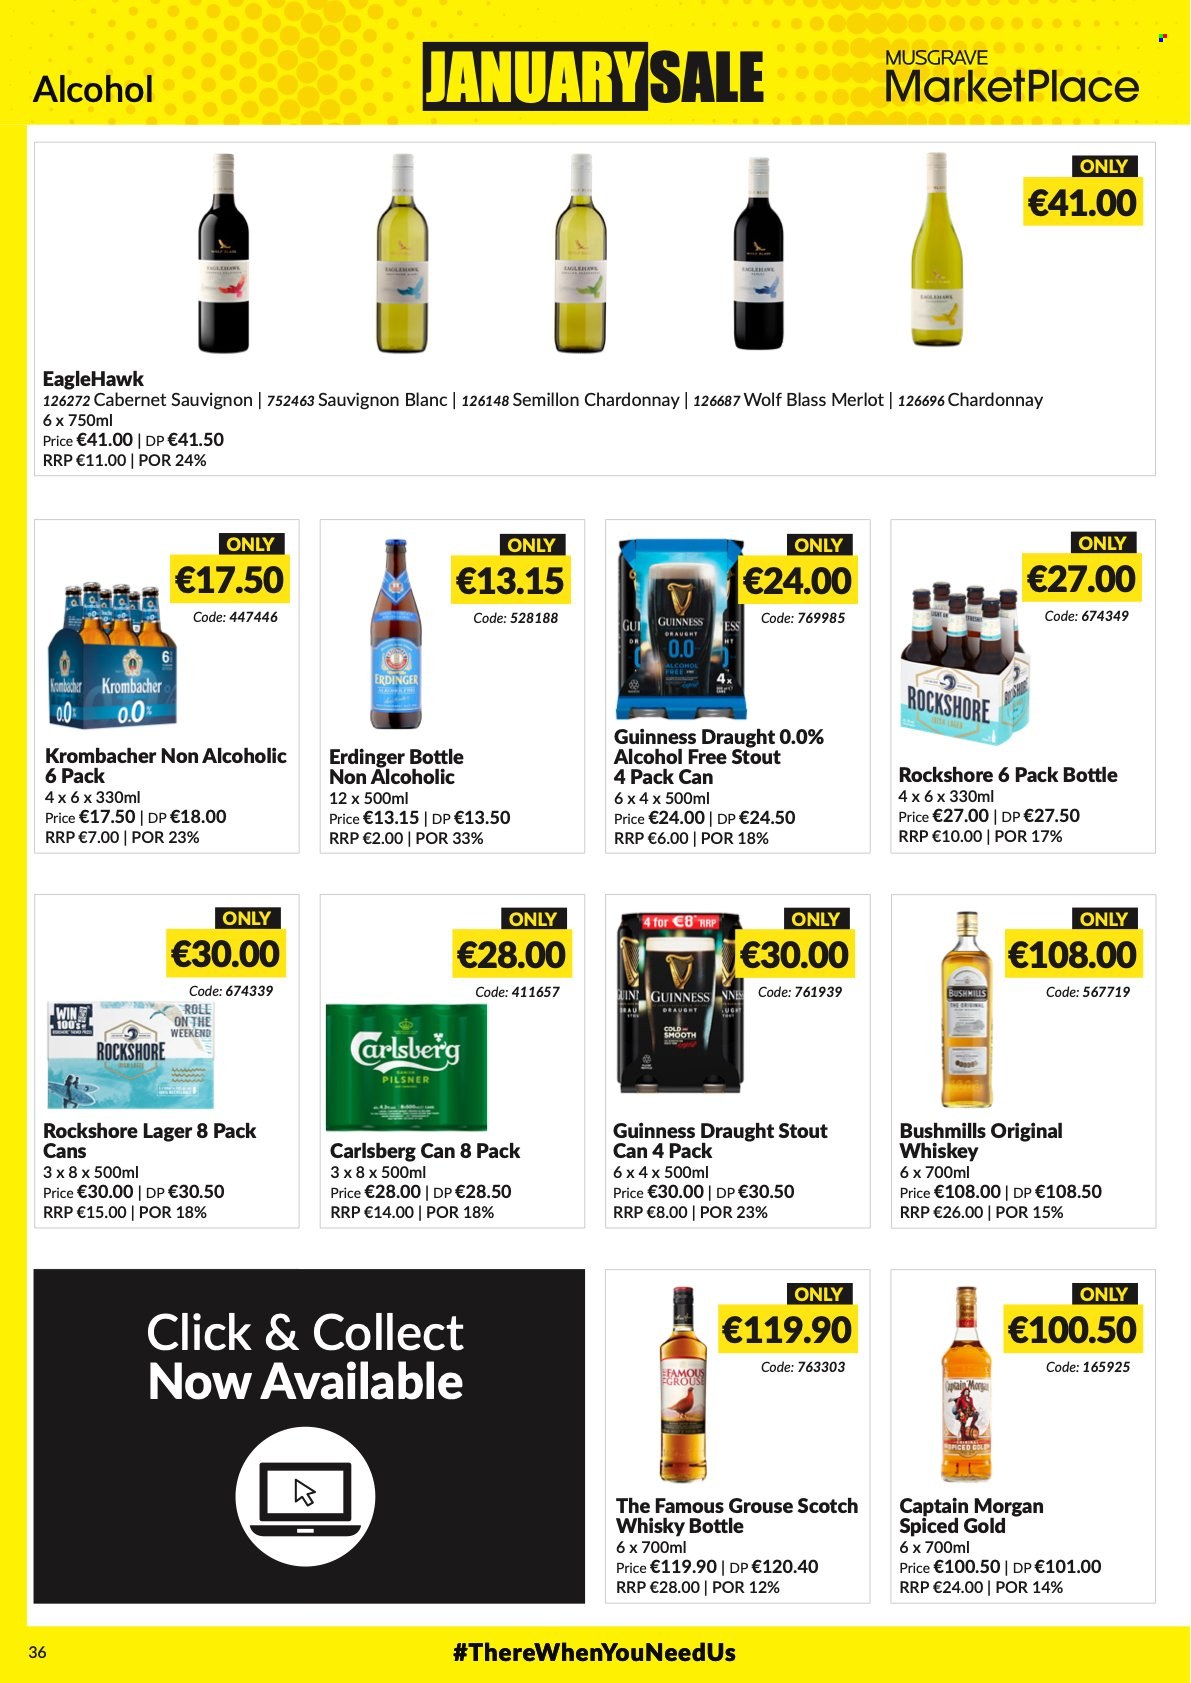 thumbnail - MUSGRAVE Market Place offer  - 26.12.2021 - 15.01.2022 - Sales products - Cabernet Sauvignon, red wine, white wine, Chardonnay, wine, Merlot, Sauvignon Blanc, Captain Morgan, whiskey, The Famous Grouse, scotch whisky, whisky, beer, Carlsberg, Guinness, Lager, Rockshore, roll-on. Page 36.